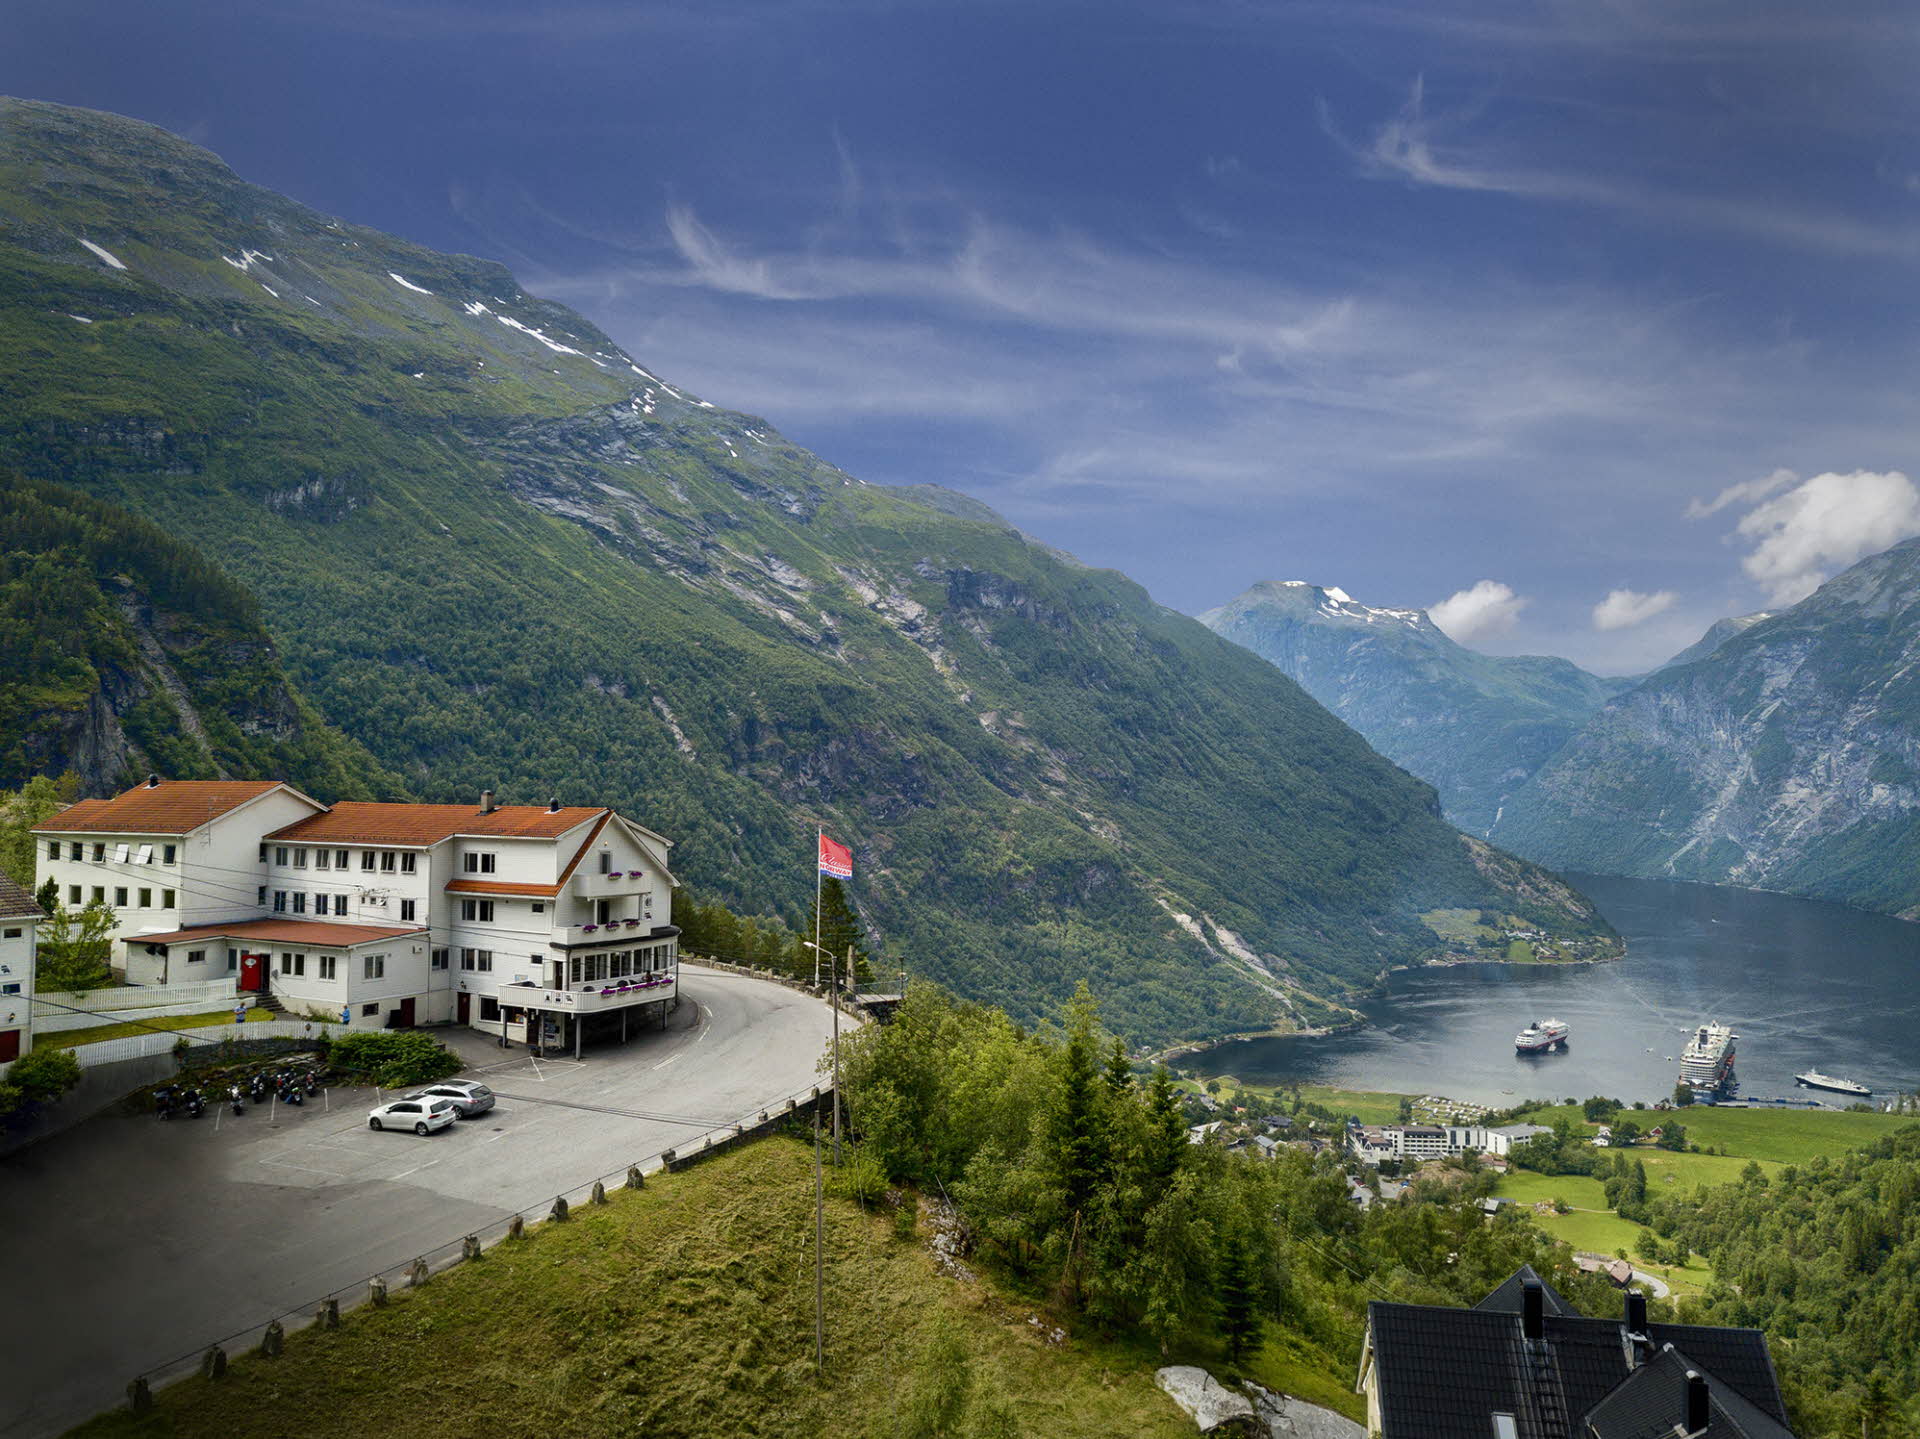 Hotel in Geirnager in mountainside, fjord with 3 cruise ships below in summer